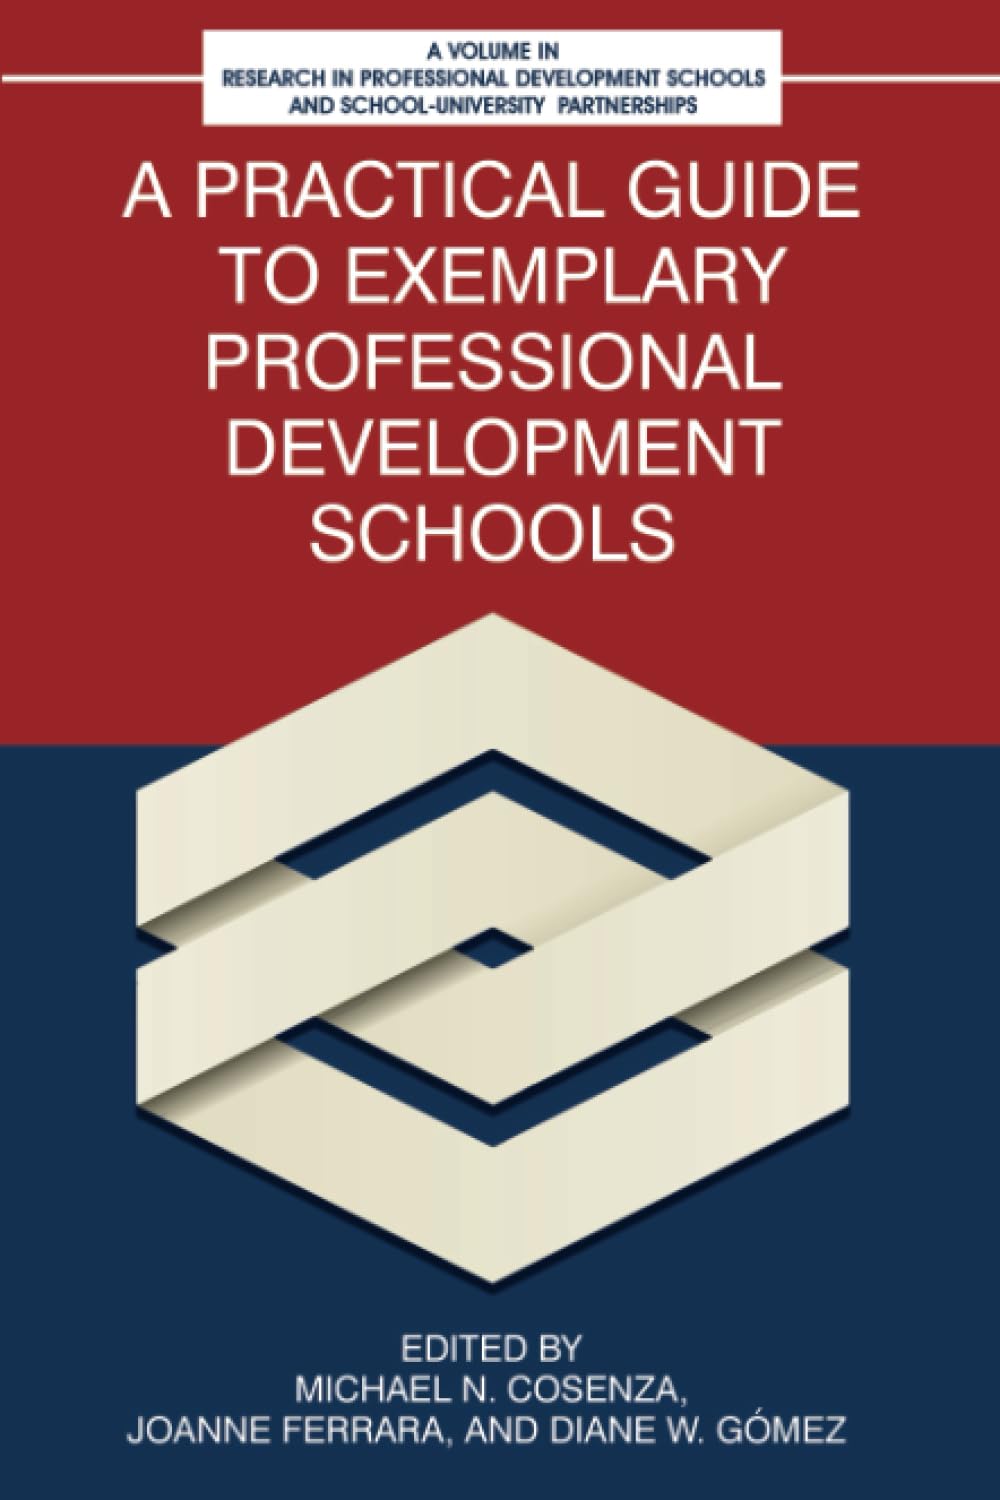 Book cover of A Practical Guide to Exemplary Professional Development Schools (Research in Professional Development Schools and School-University Partnerships)